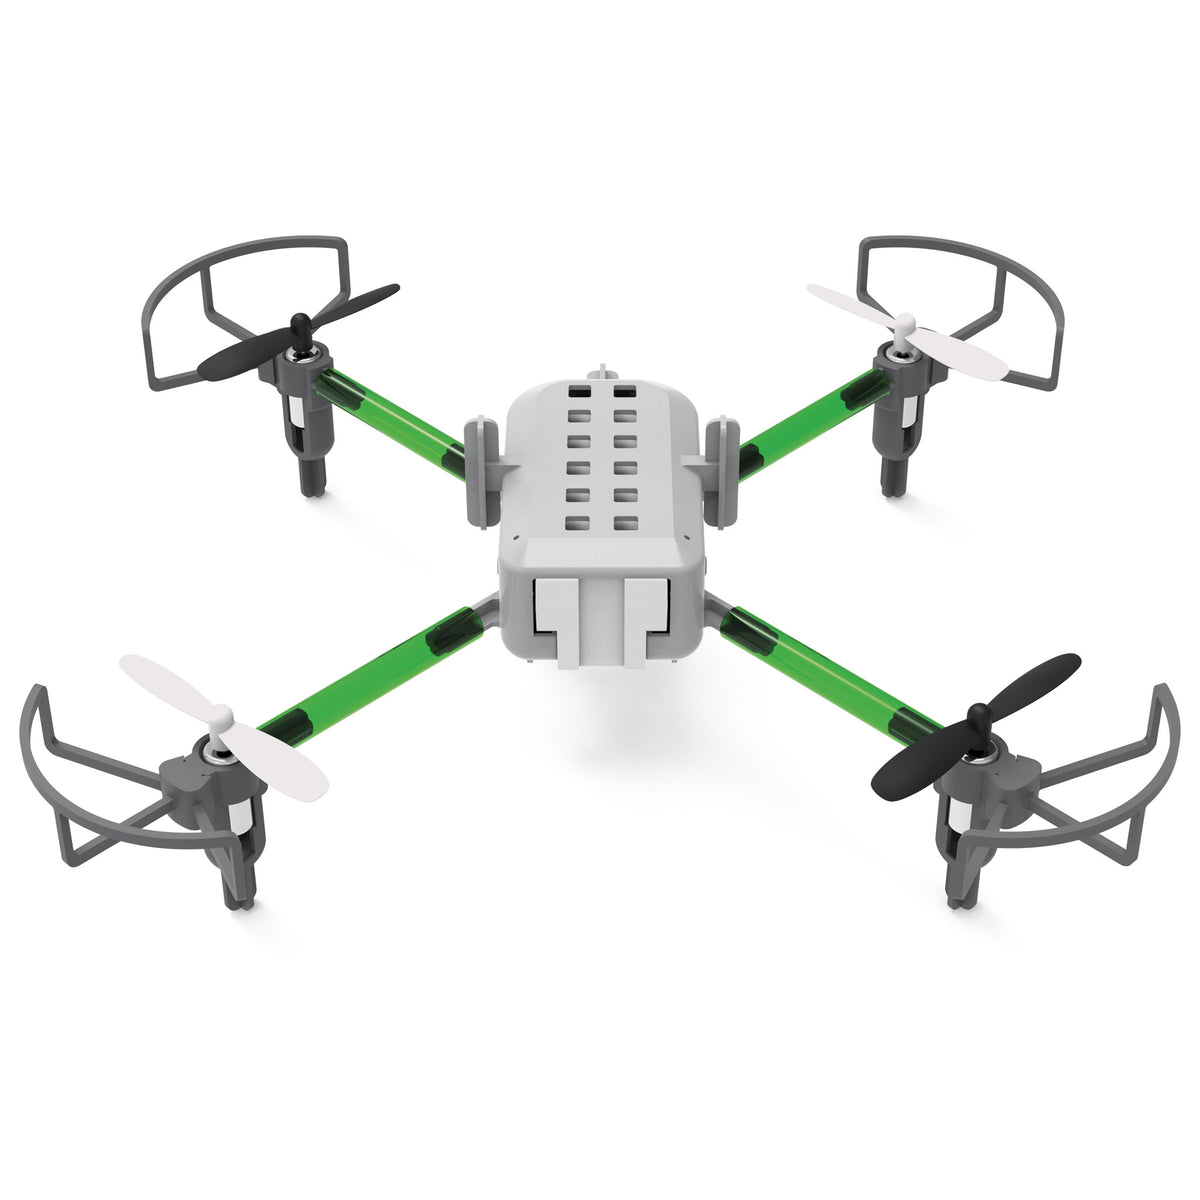 Drone Maker Kit - STEAM Activity for Kids STEAMbright